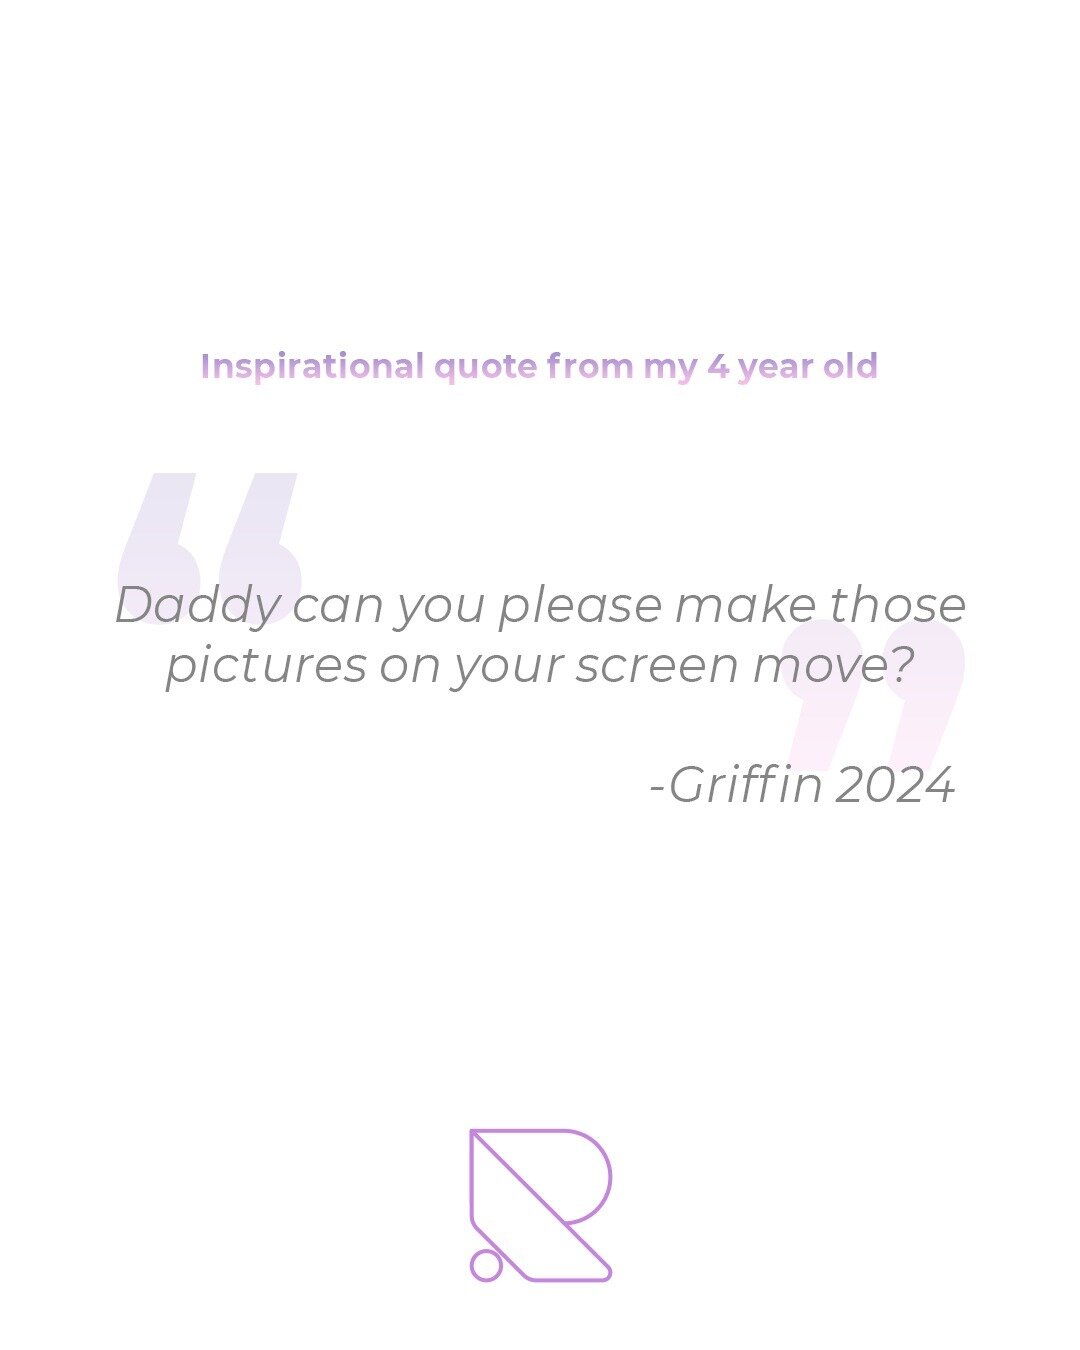 Where do you get your inspiration to create from? My source is my 4 year old asking me to make static images on the screen move so it's interesting to him.

#motiondesign #inspirationalquotes #creative #family #motion